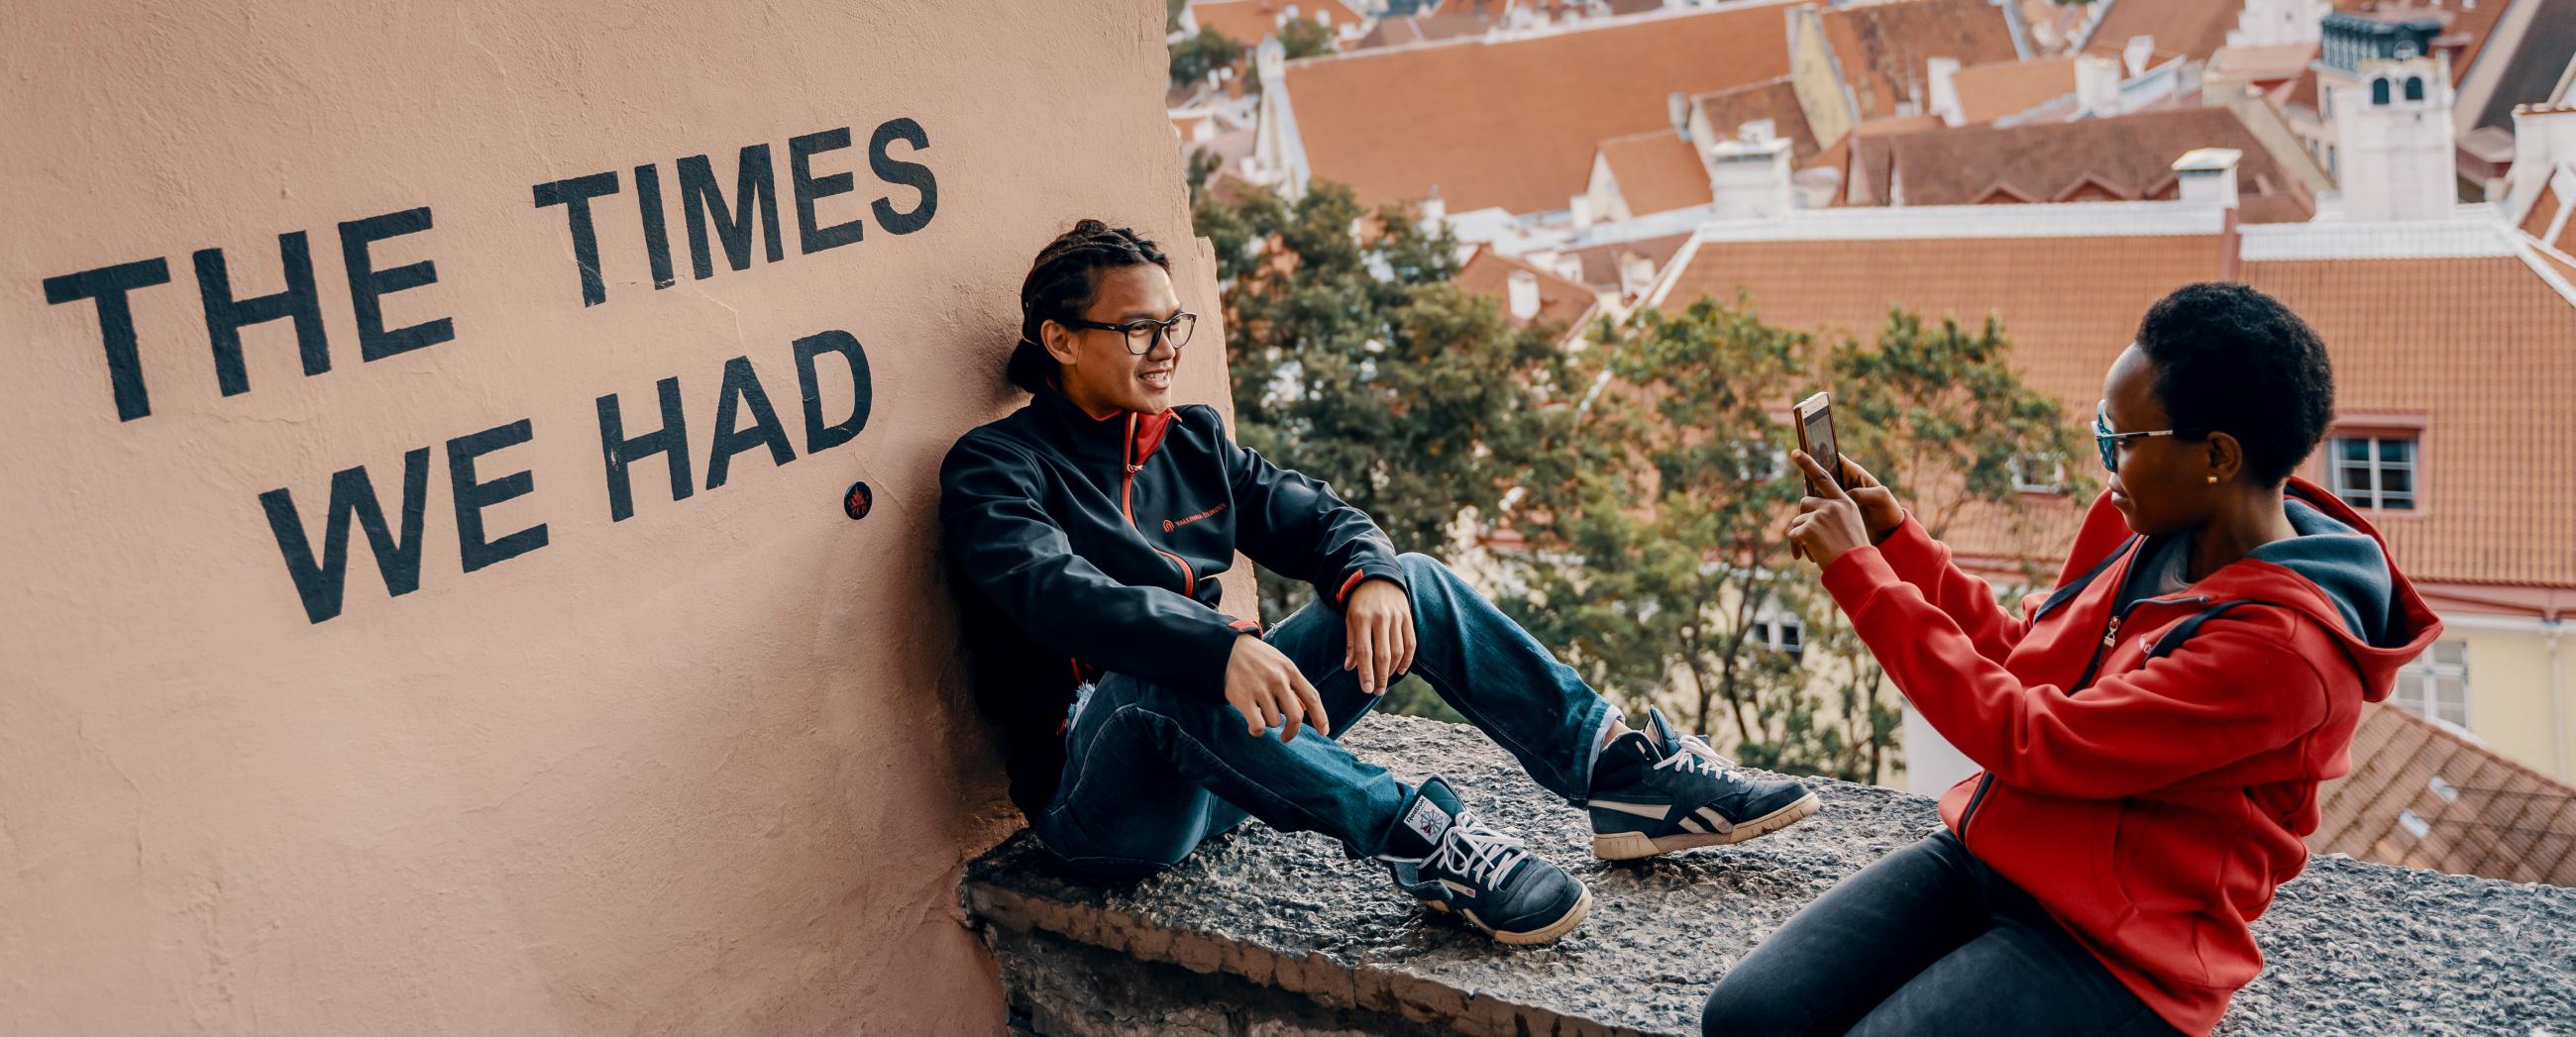 Photo of our students at a popular photo location in Tallinn oldtown